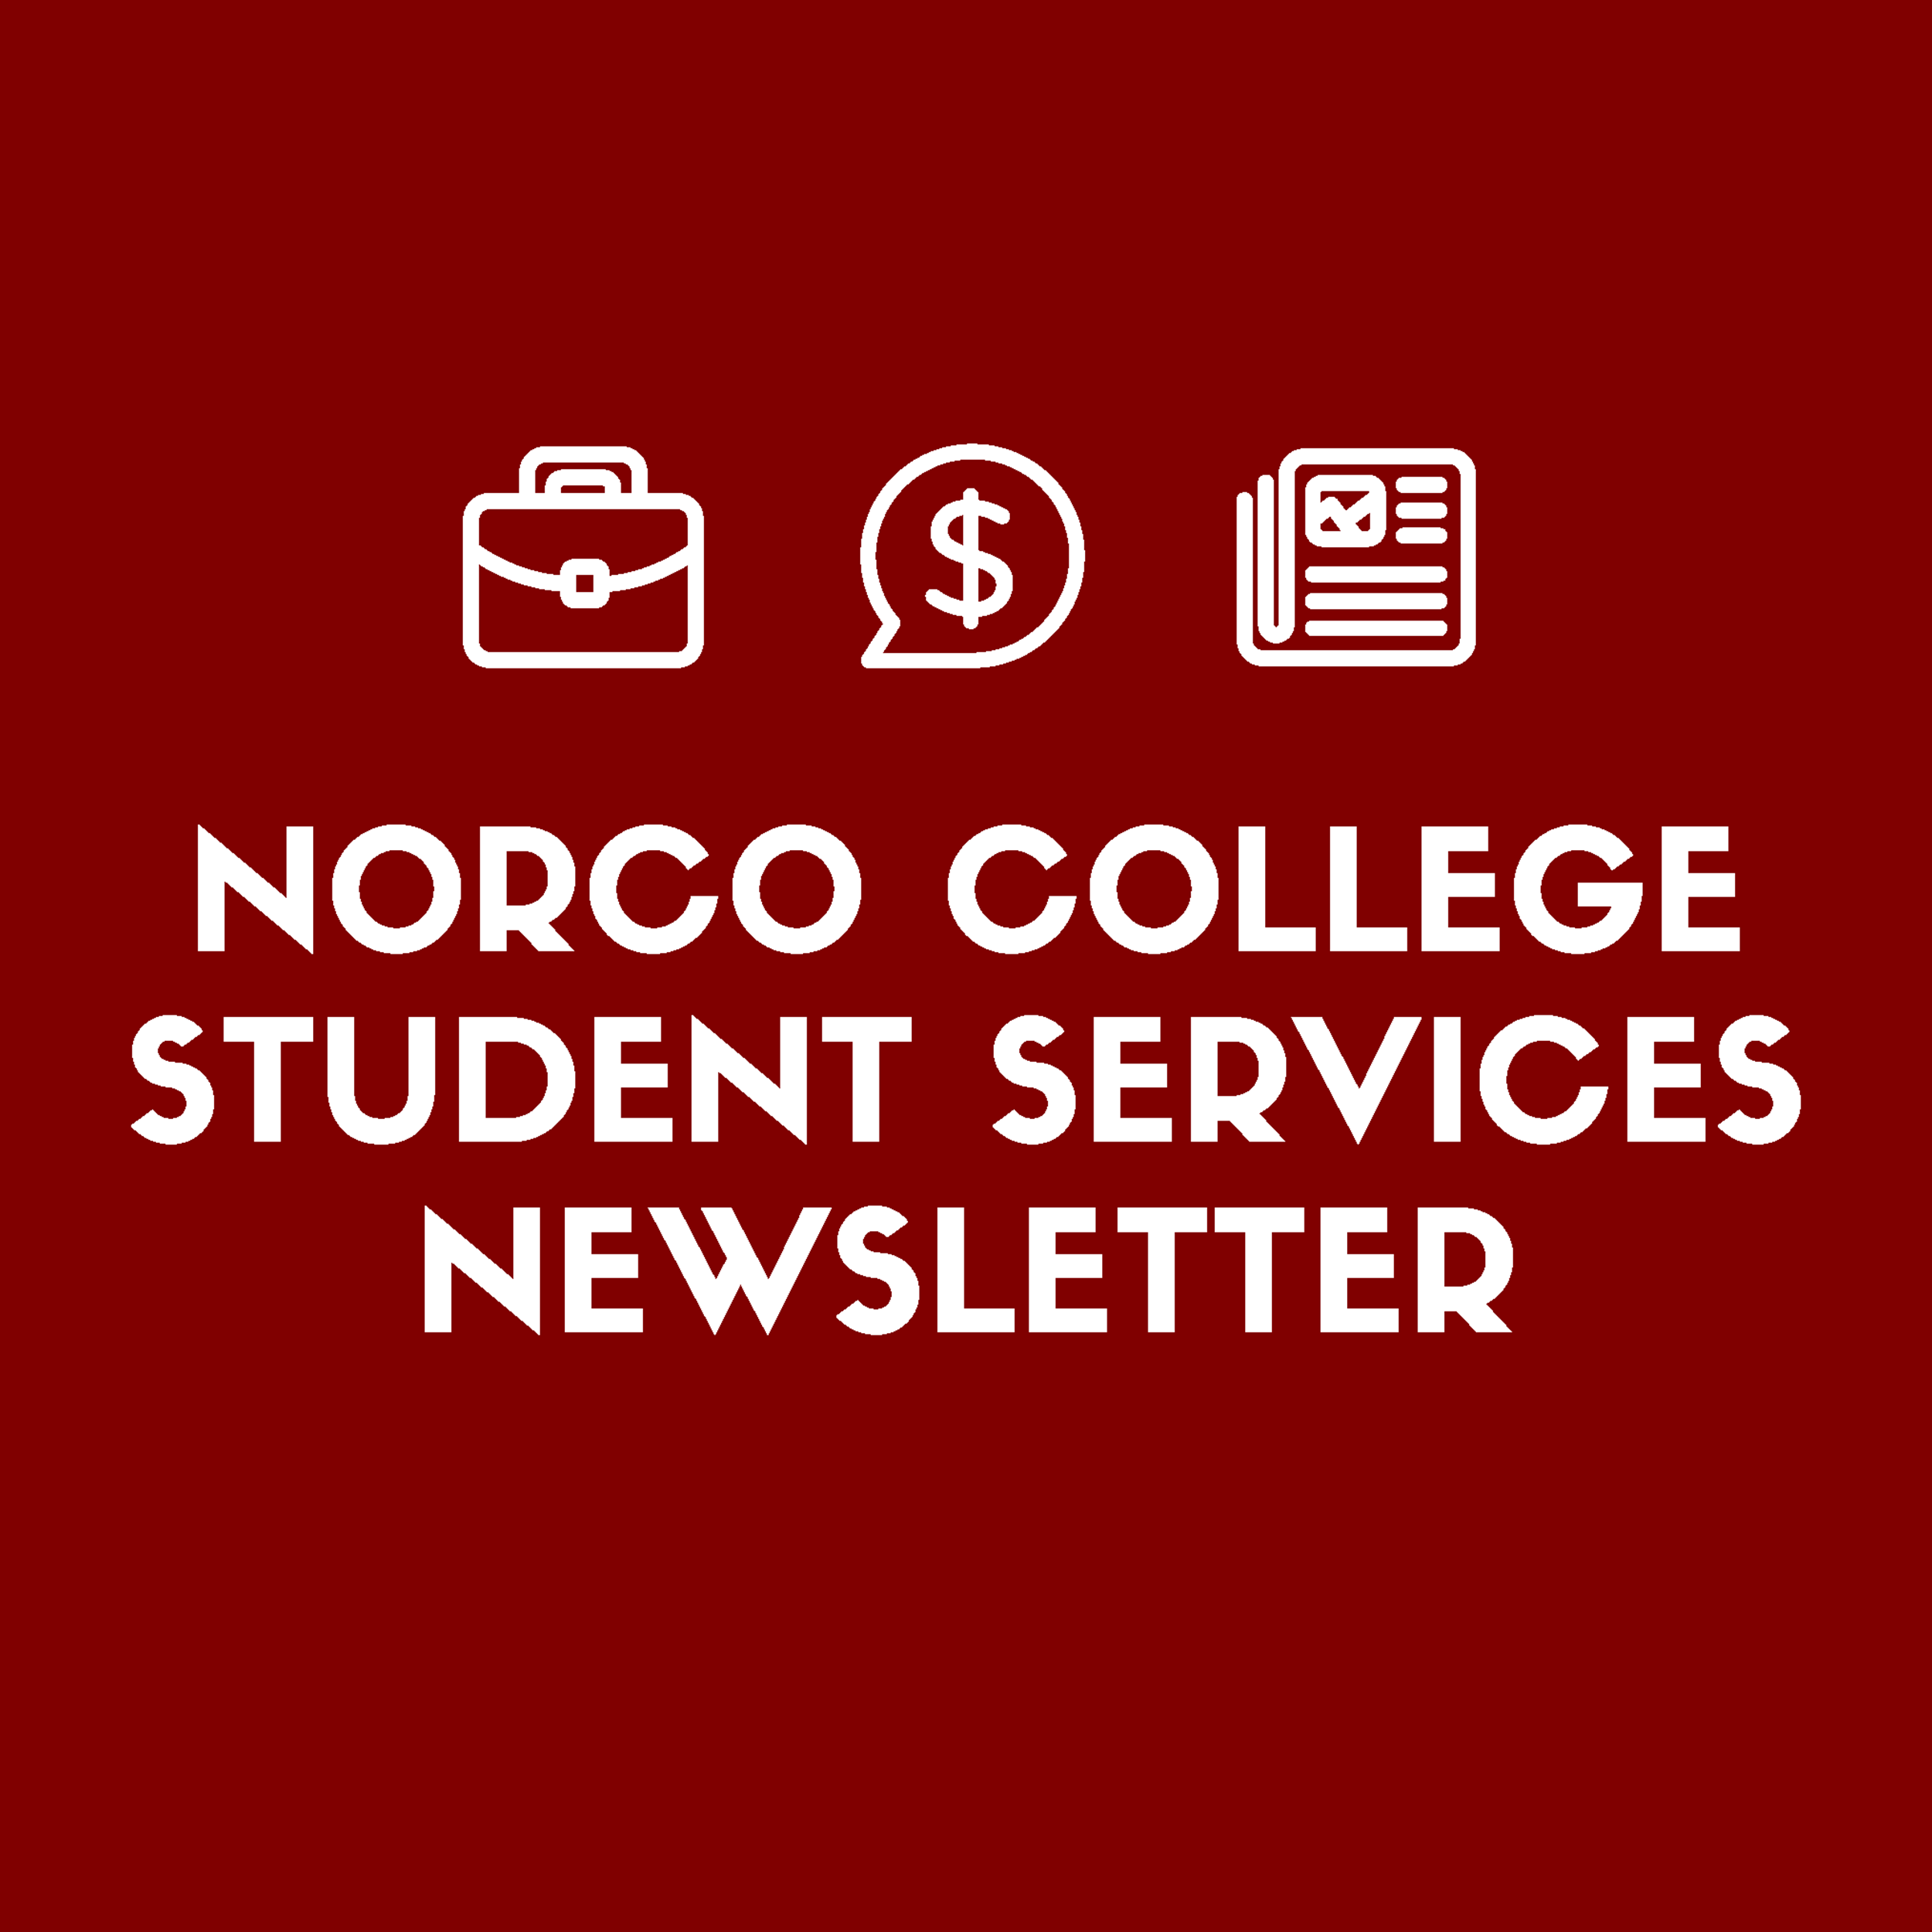 Norco College Student Services Newsletter